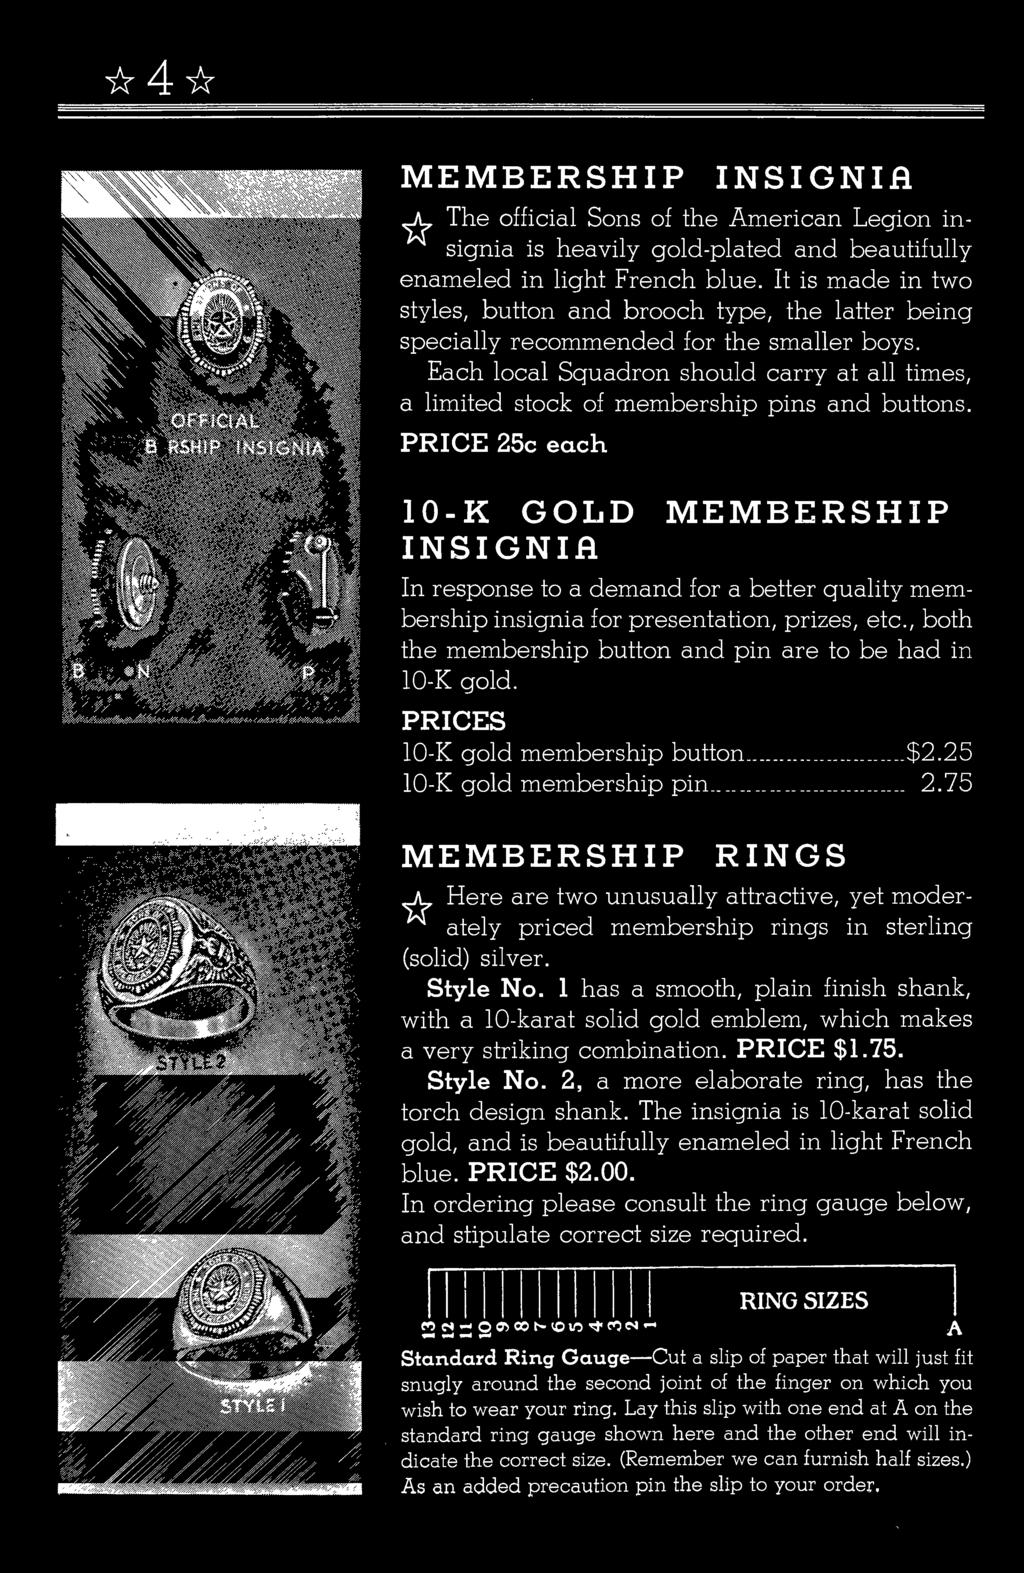 , both the membership button and pin are to be had in 10-K gold. 10-K gold membership button...$2.25 10-K gold membership pin 2.